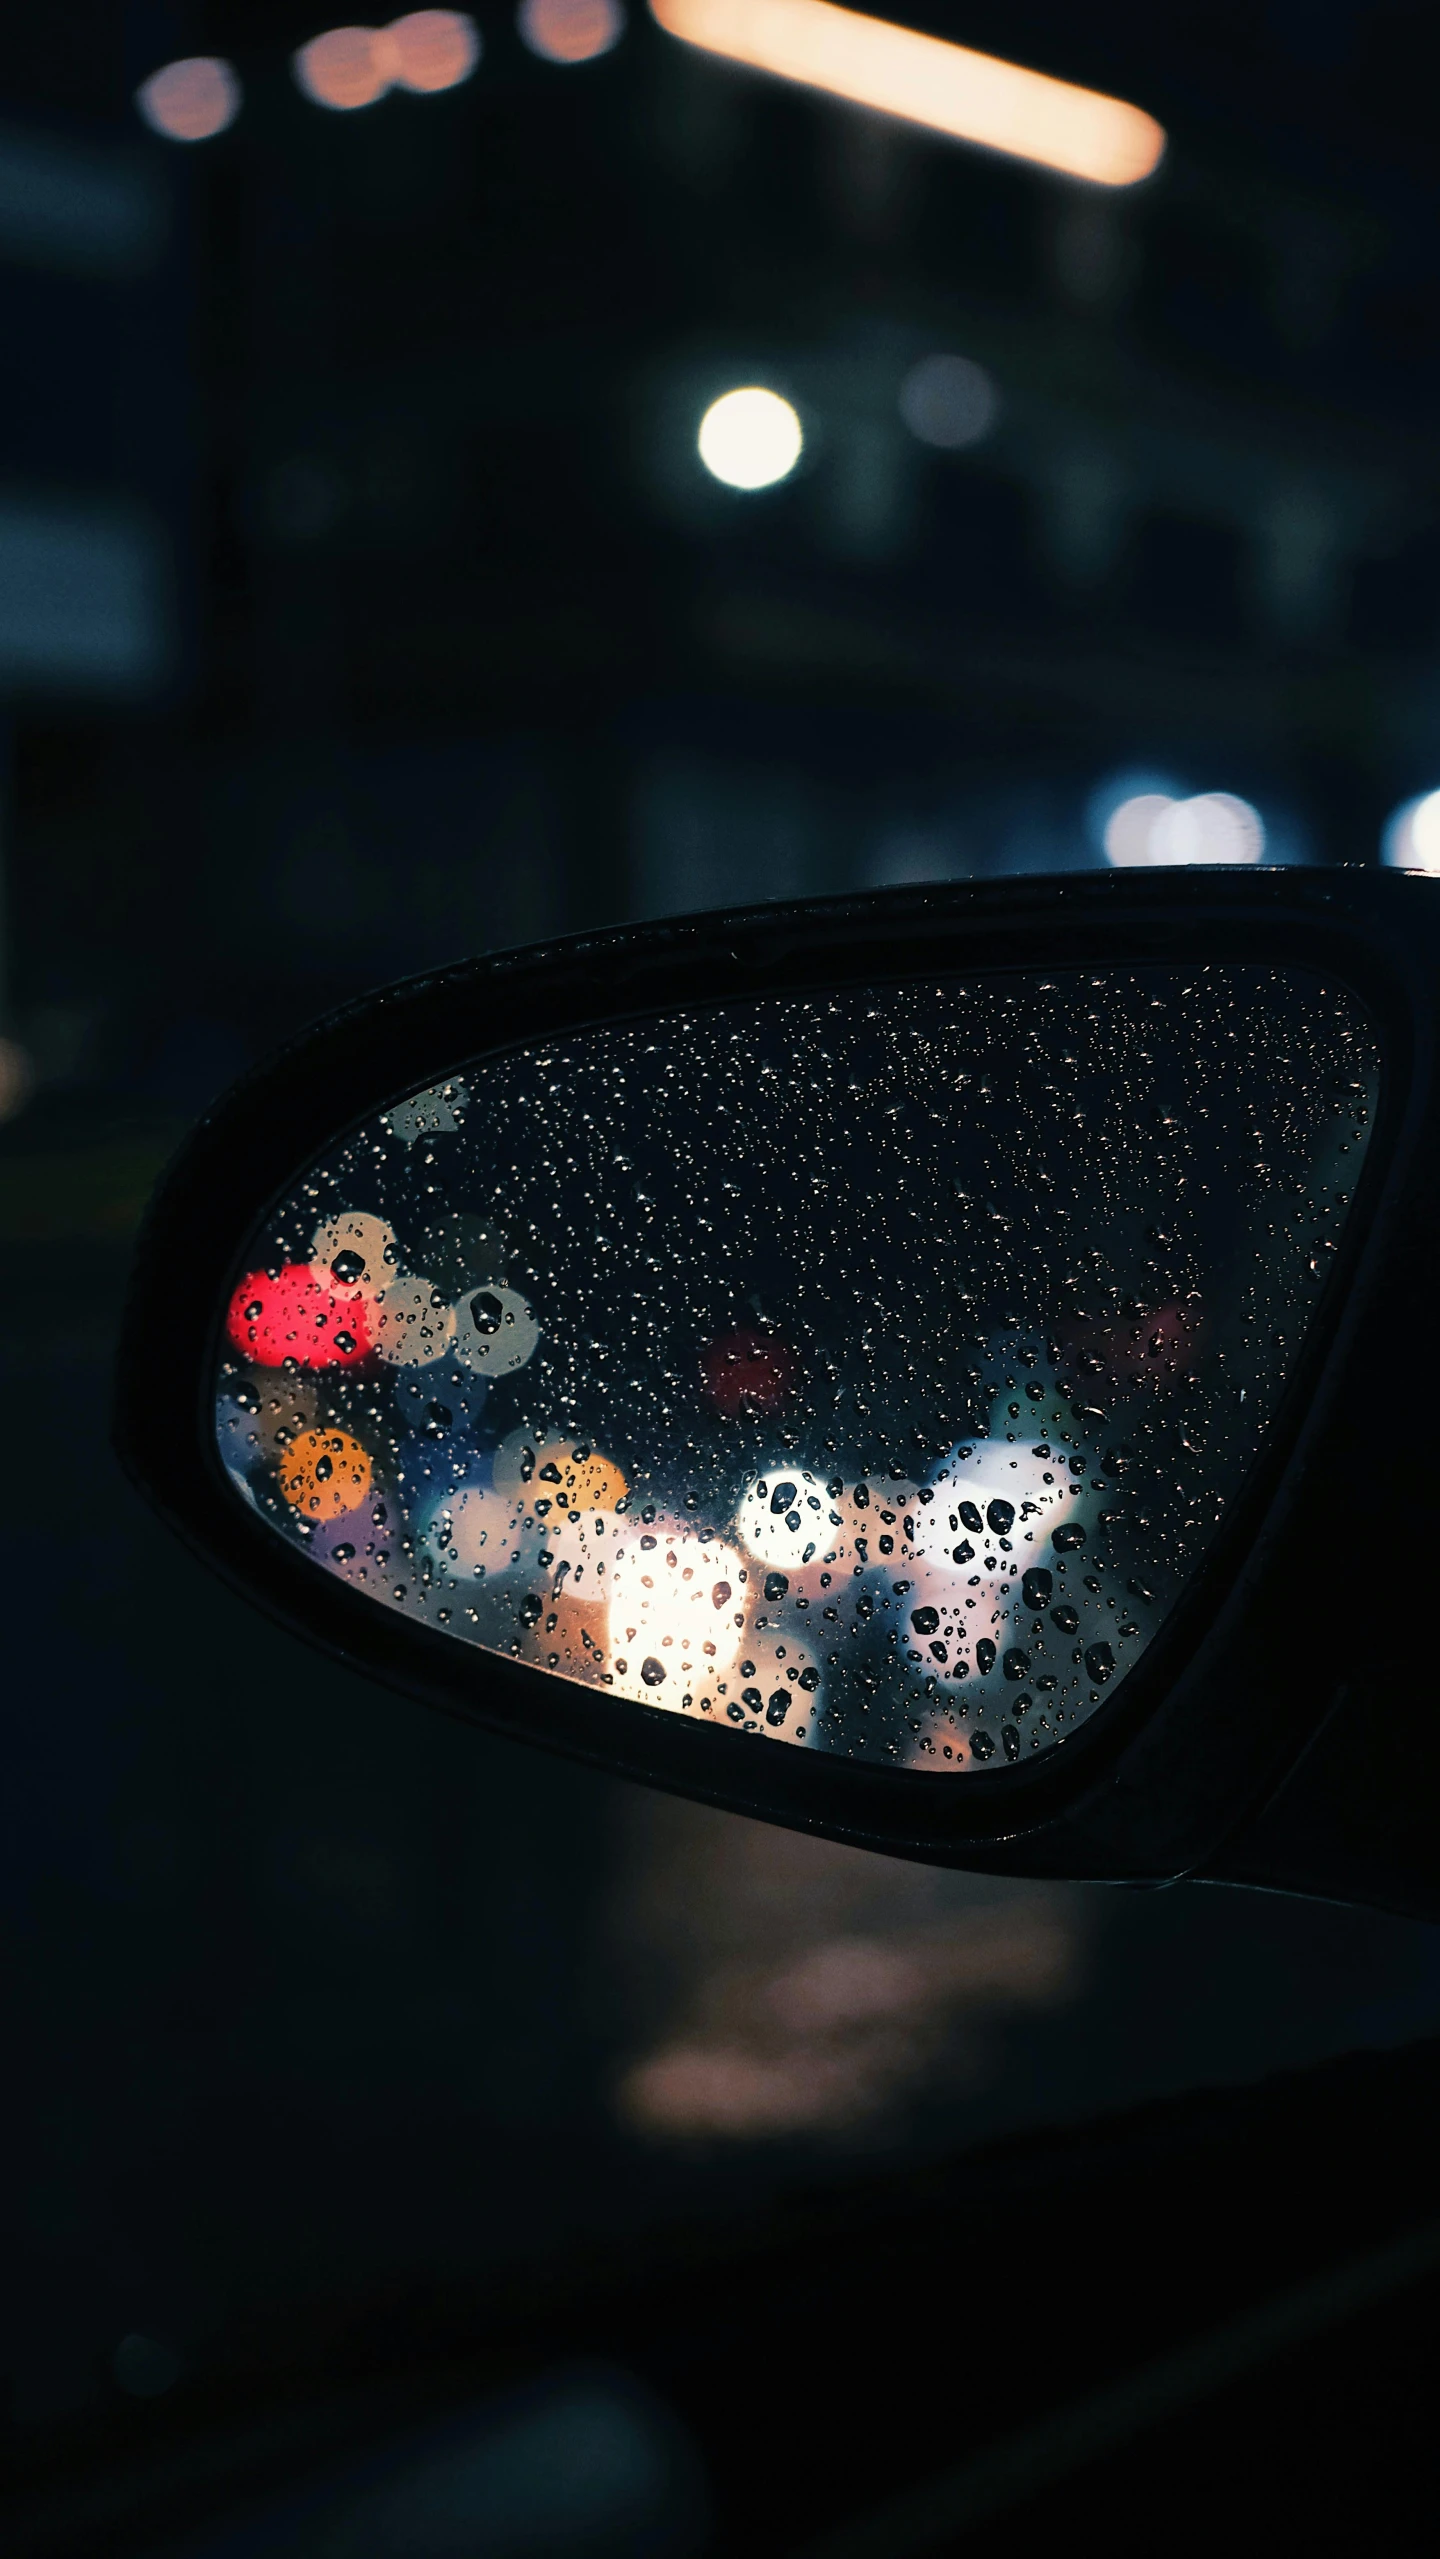 a close up of a car mirror with cars in the background